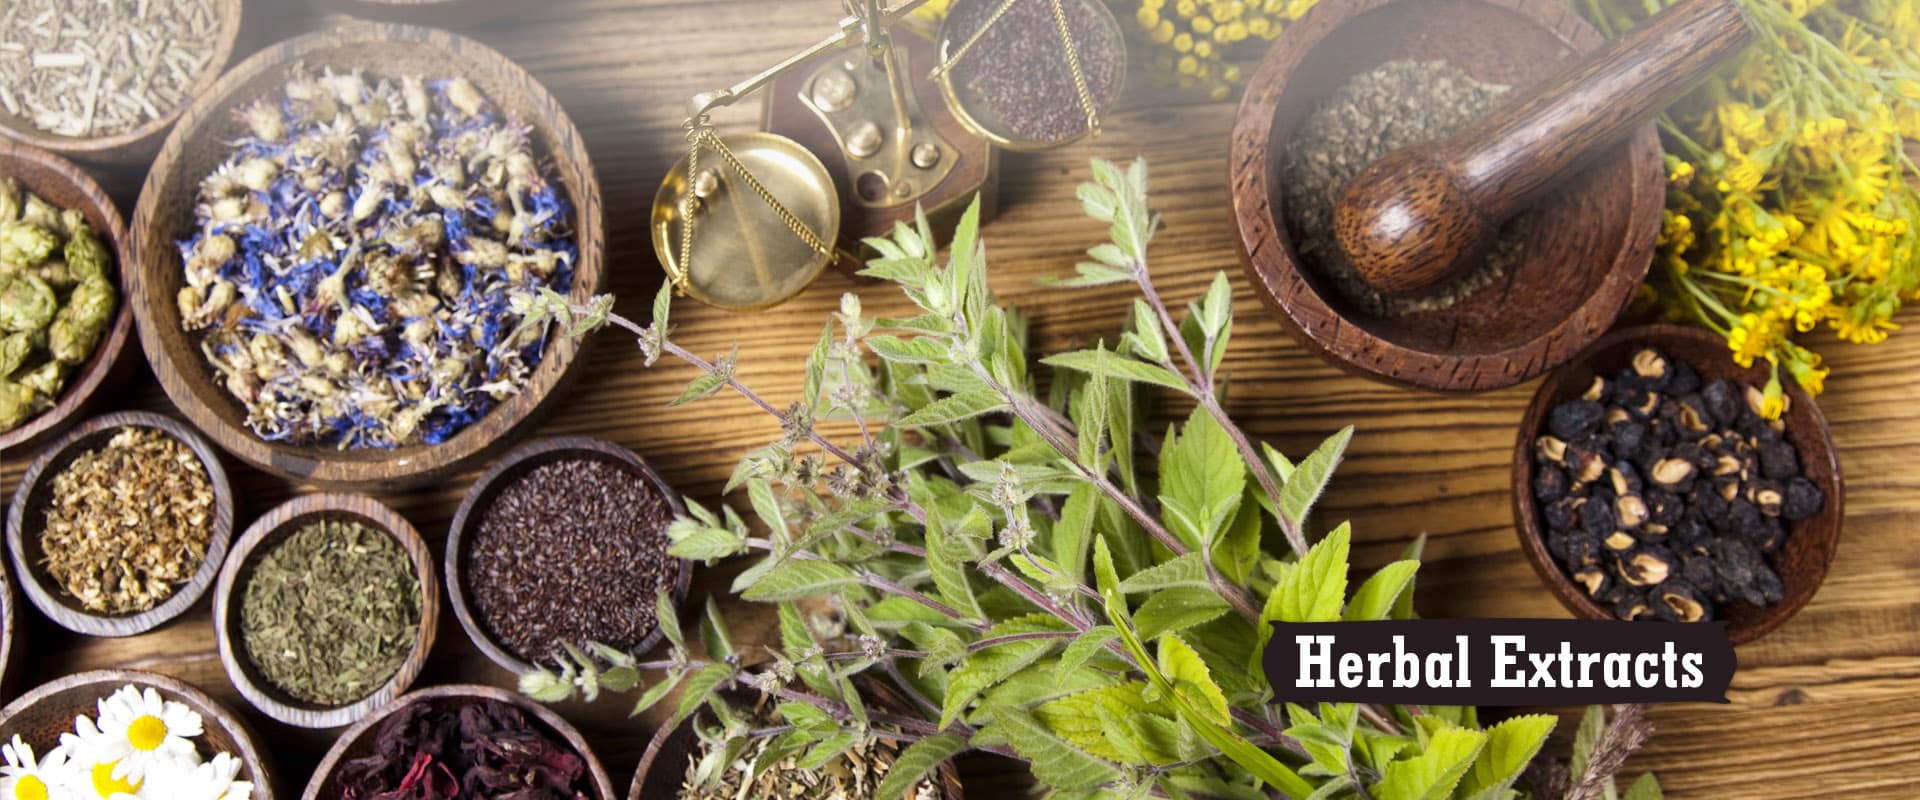 Herbal Extracts Manufacturer and Supplier